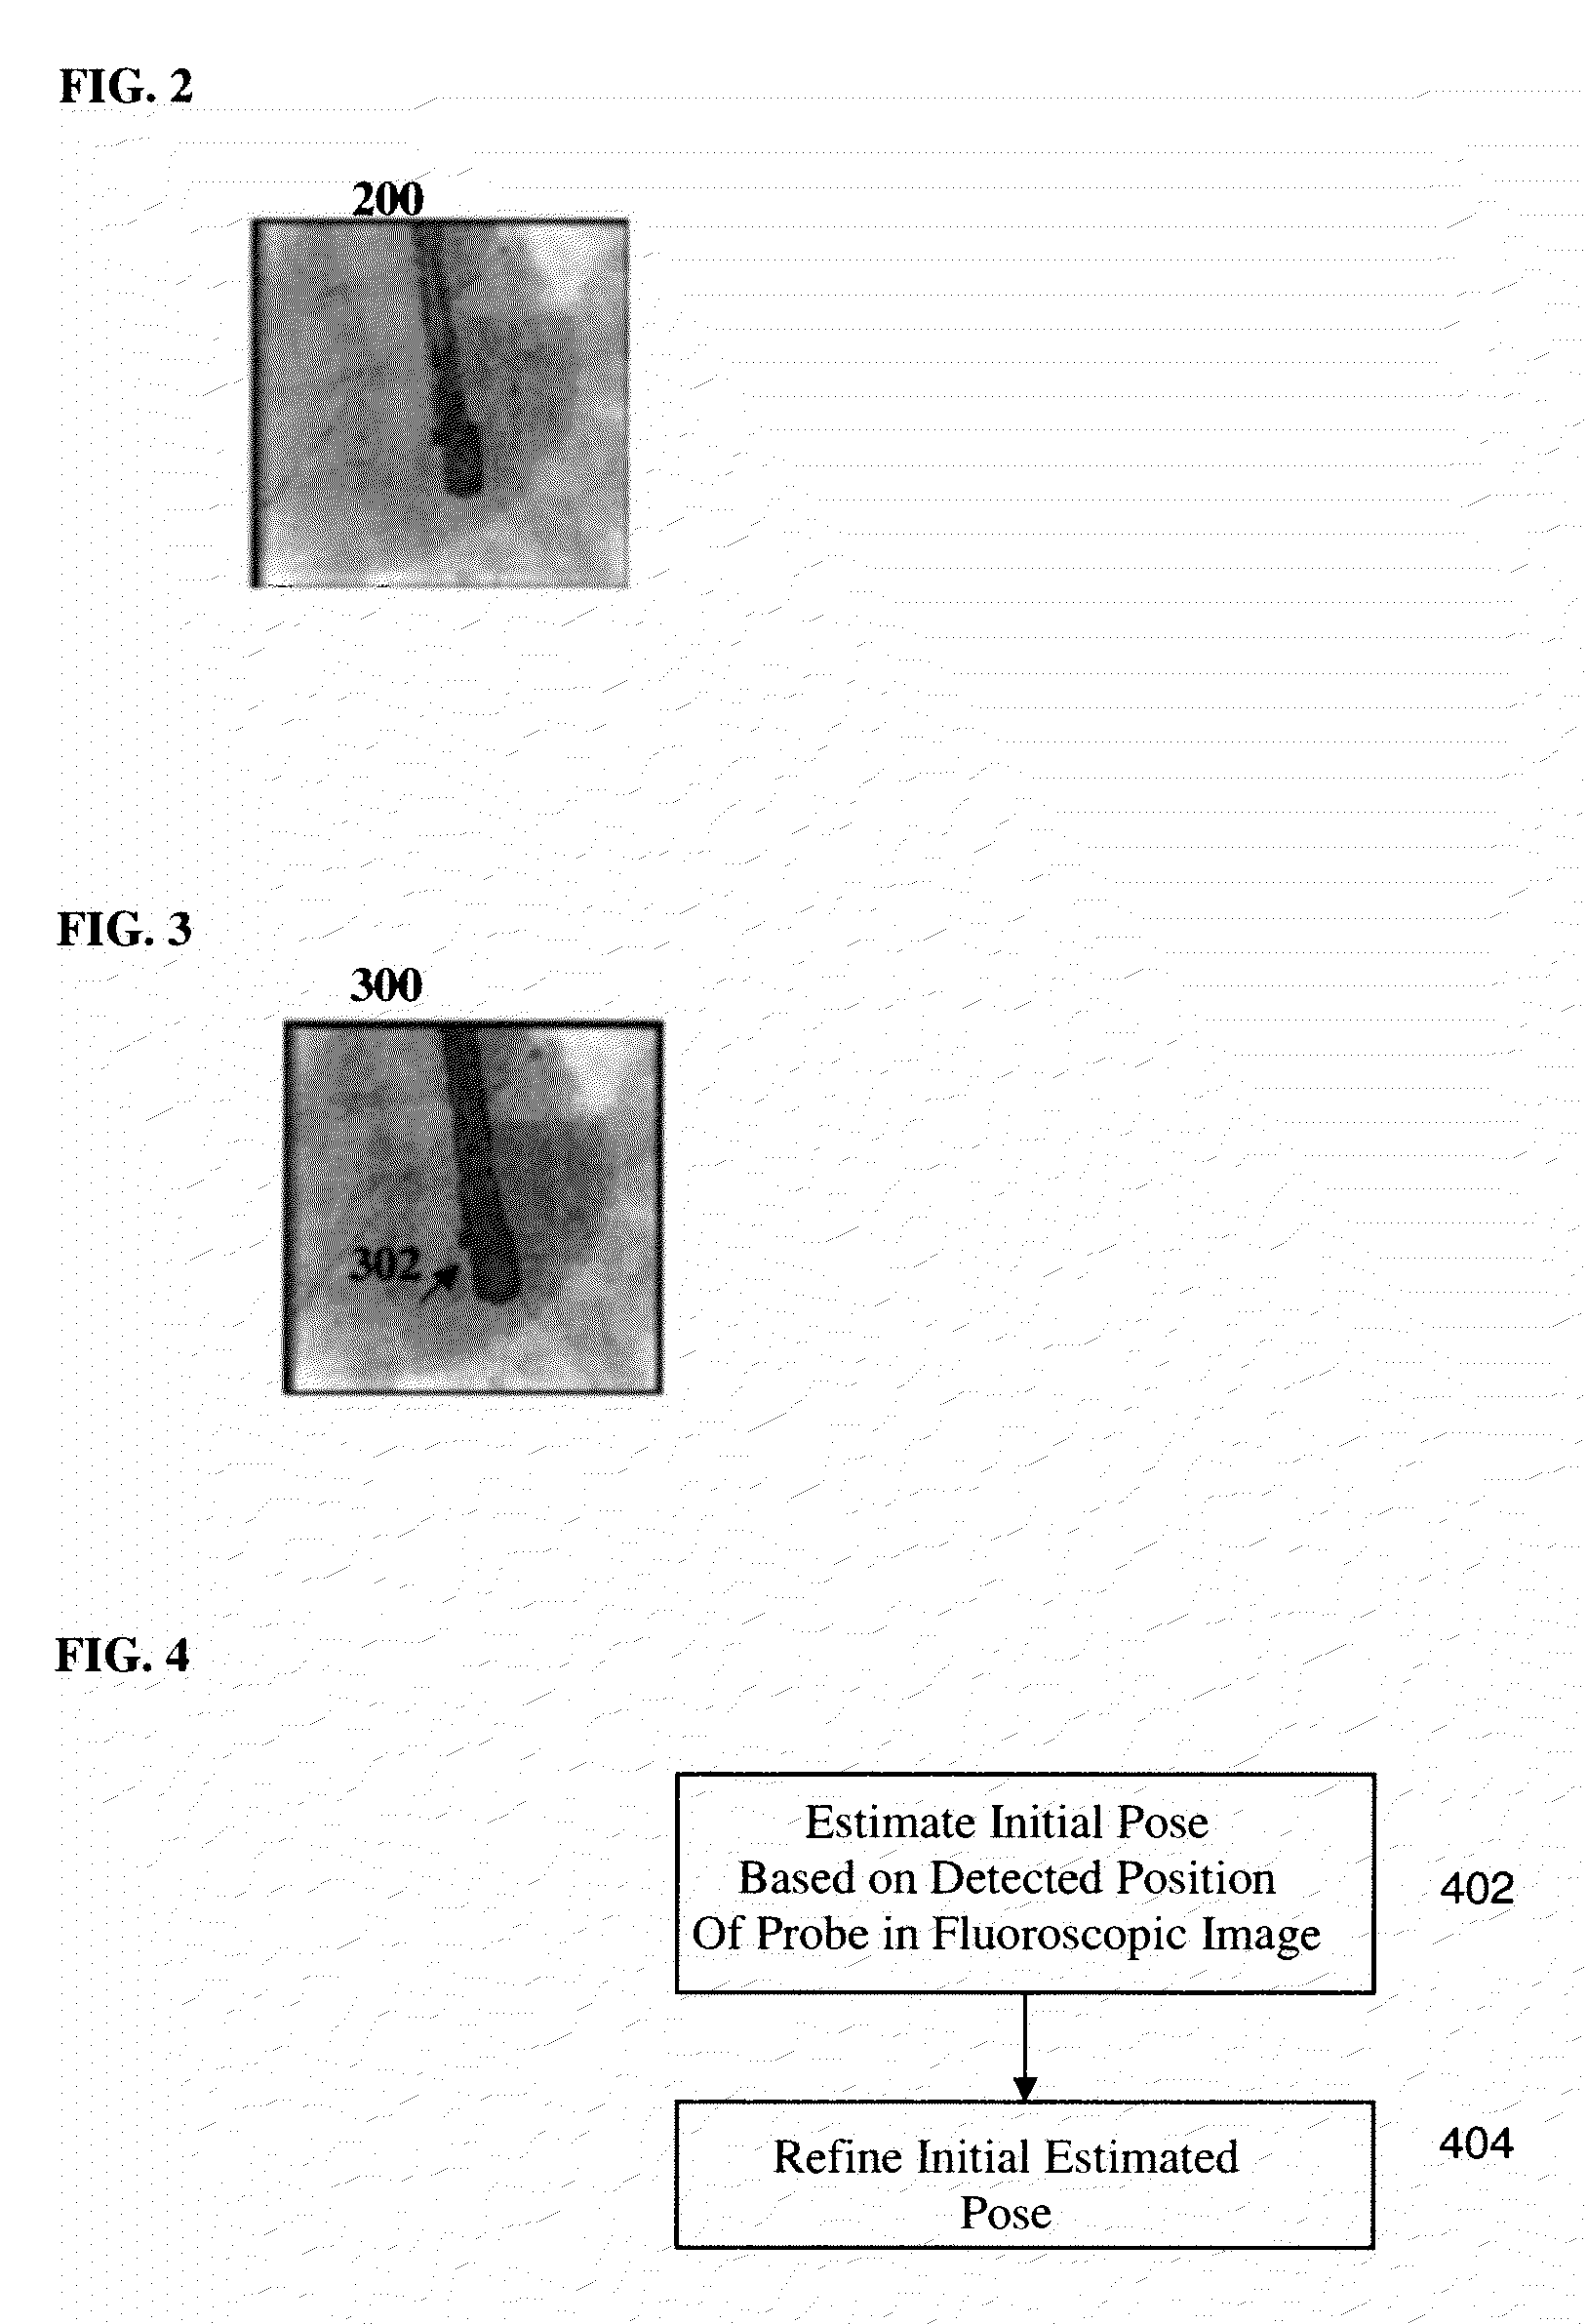 Method and System for Registration of Ultrasound and Physiological Models to X-ray Fluoroscopic Images